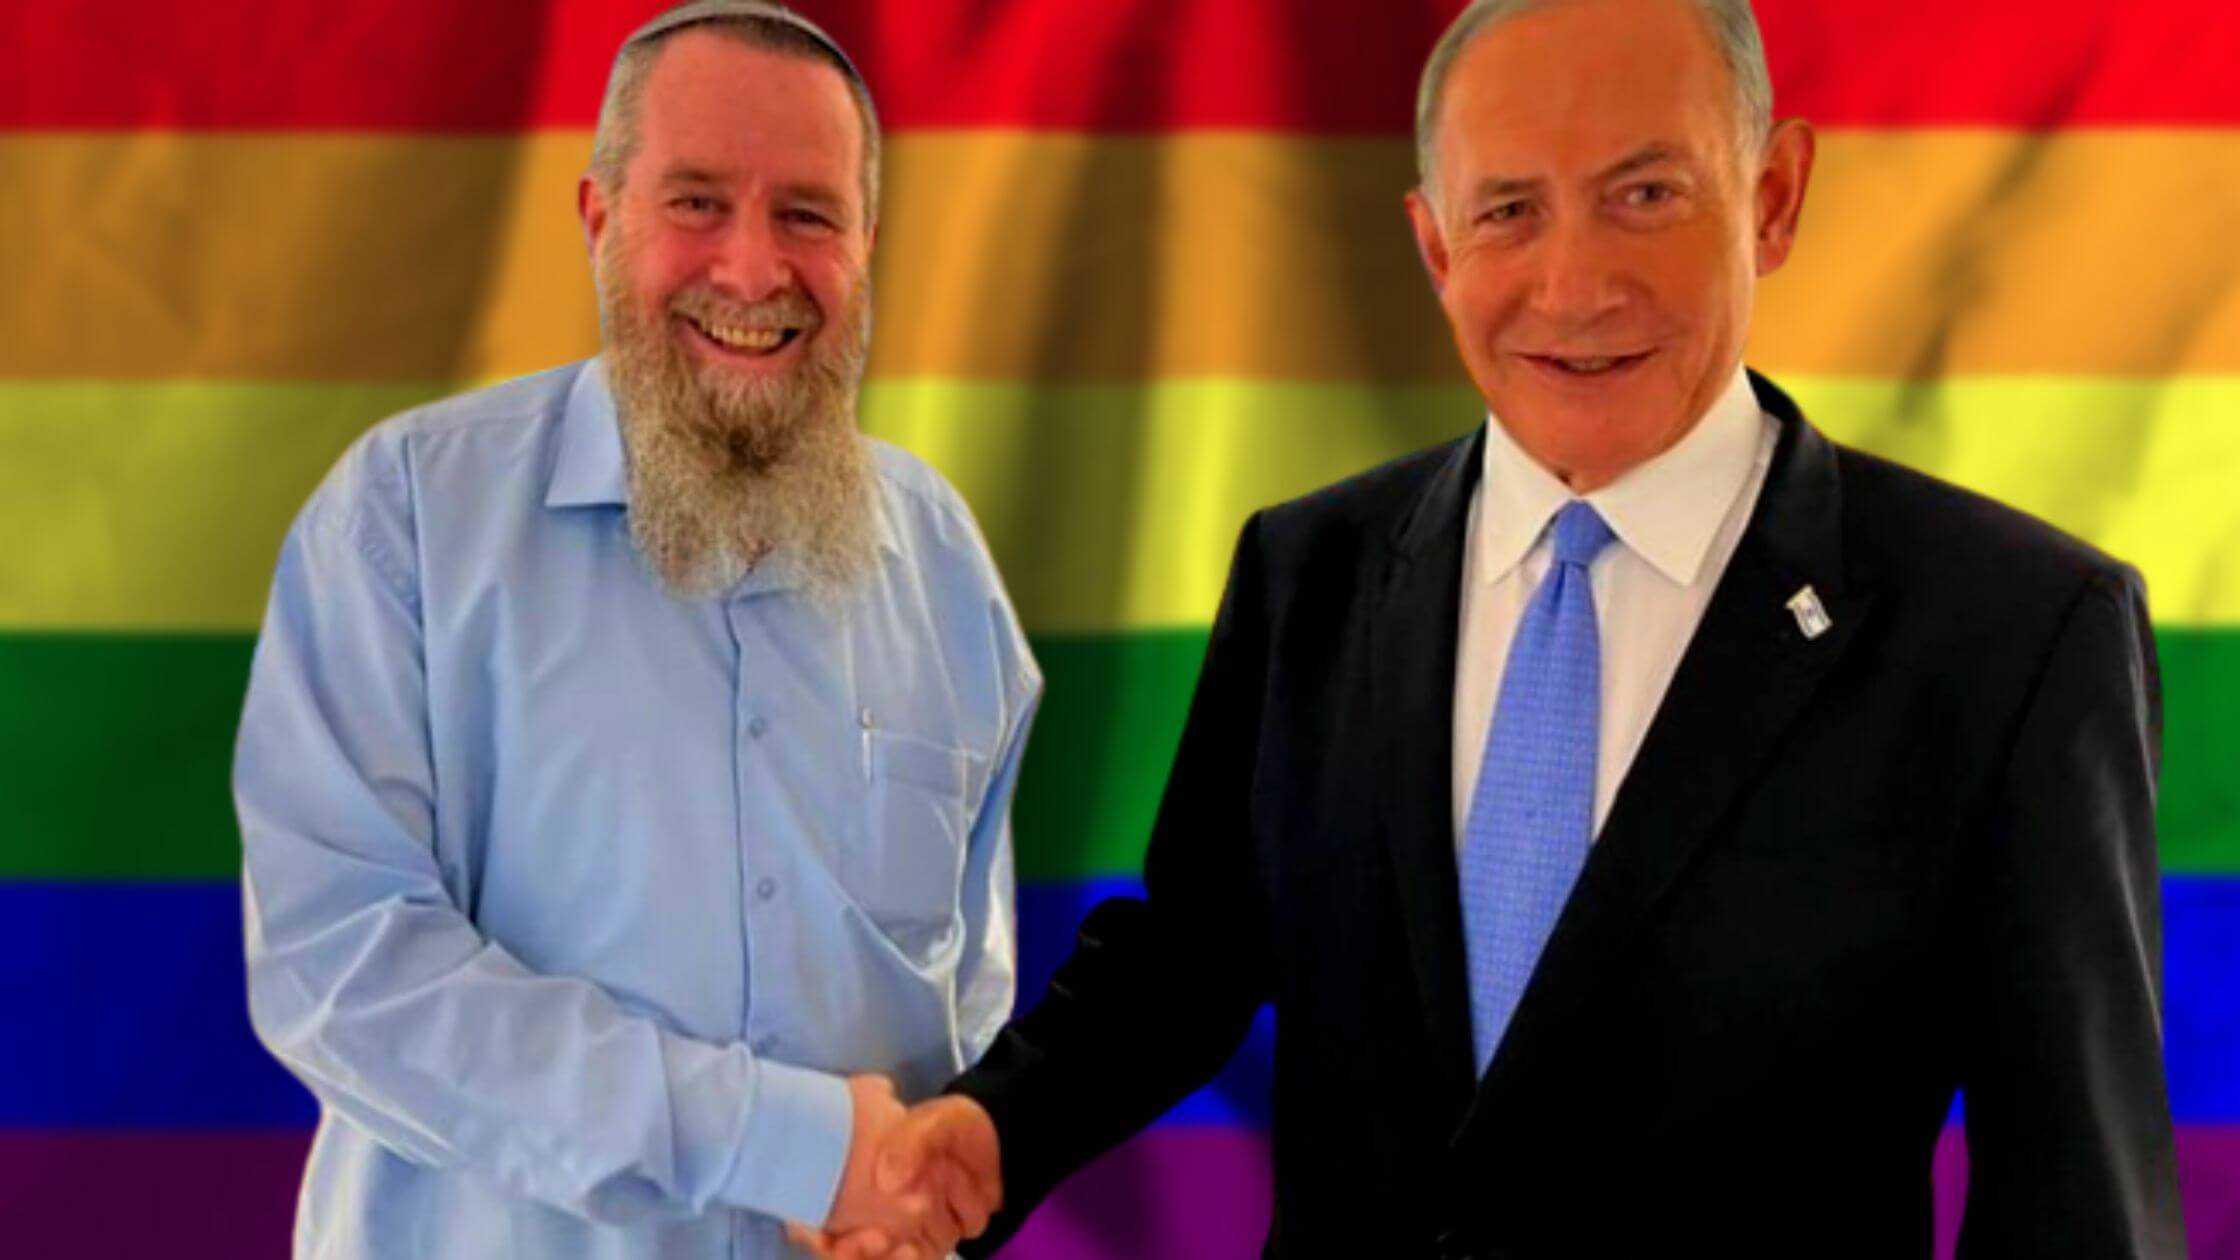 The Extremism Of Netanyahu's Anti-LGBTQ Ally